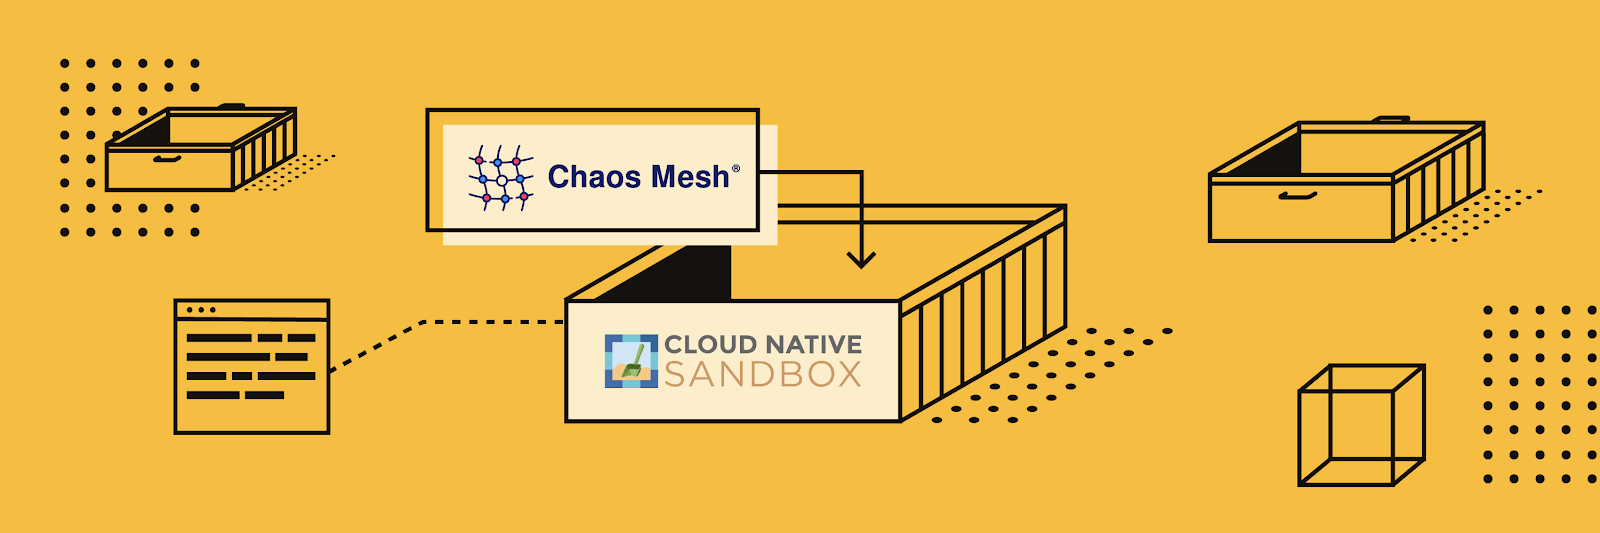 Chaos Mesh Join CNCF as Sandbox Project